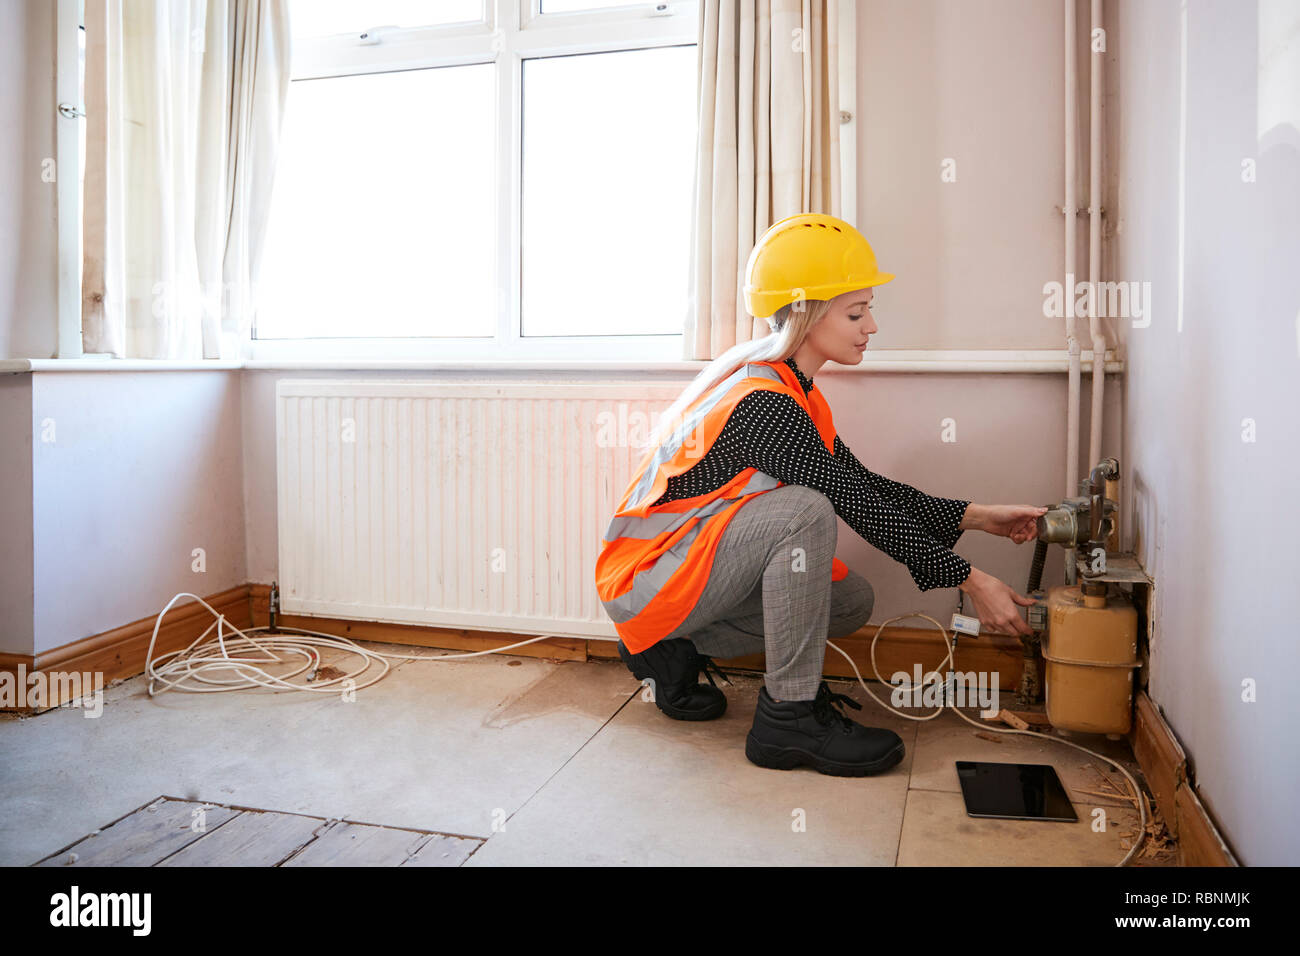 Female Surveyor In Hard Hat And High Visibility Jacket Checking Gas Supply Stock Photo